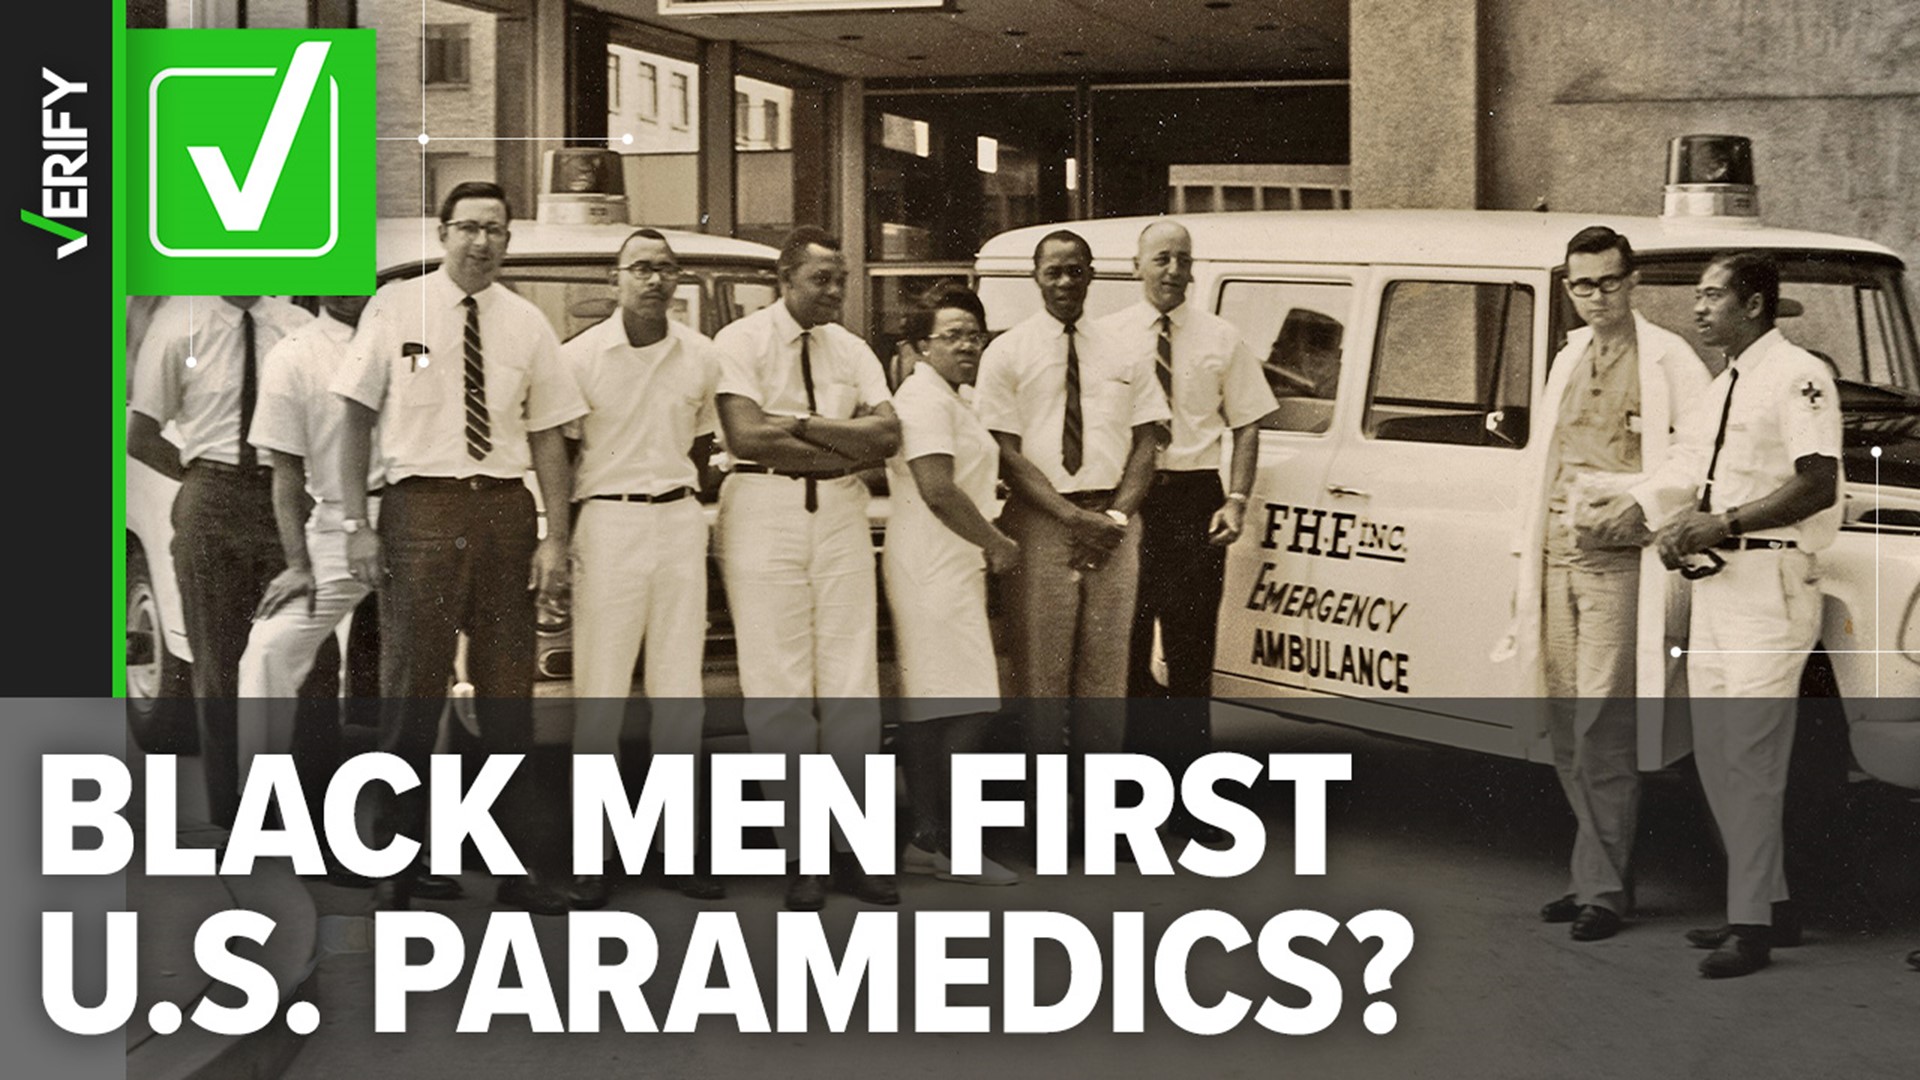 The Freedom House Ambulance Service, staffed by Black paramedics in Pittsburgh, was the first ambulance service to offer emergency medical treatment in the U.S.